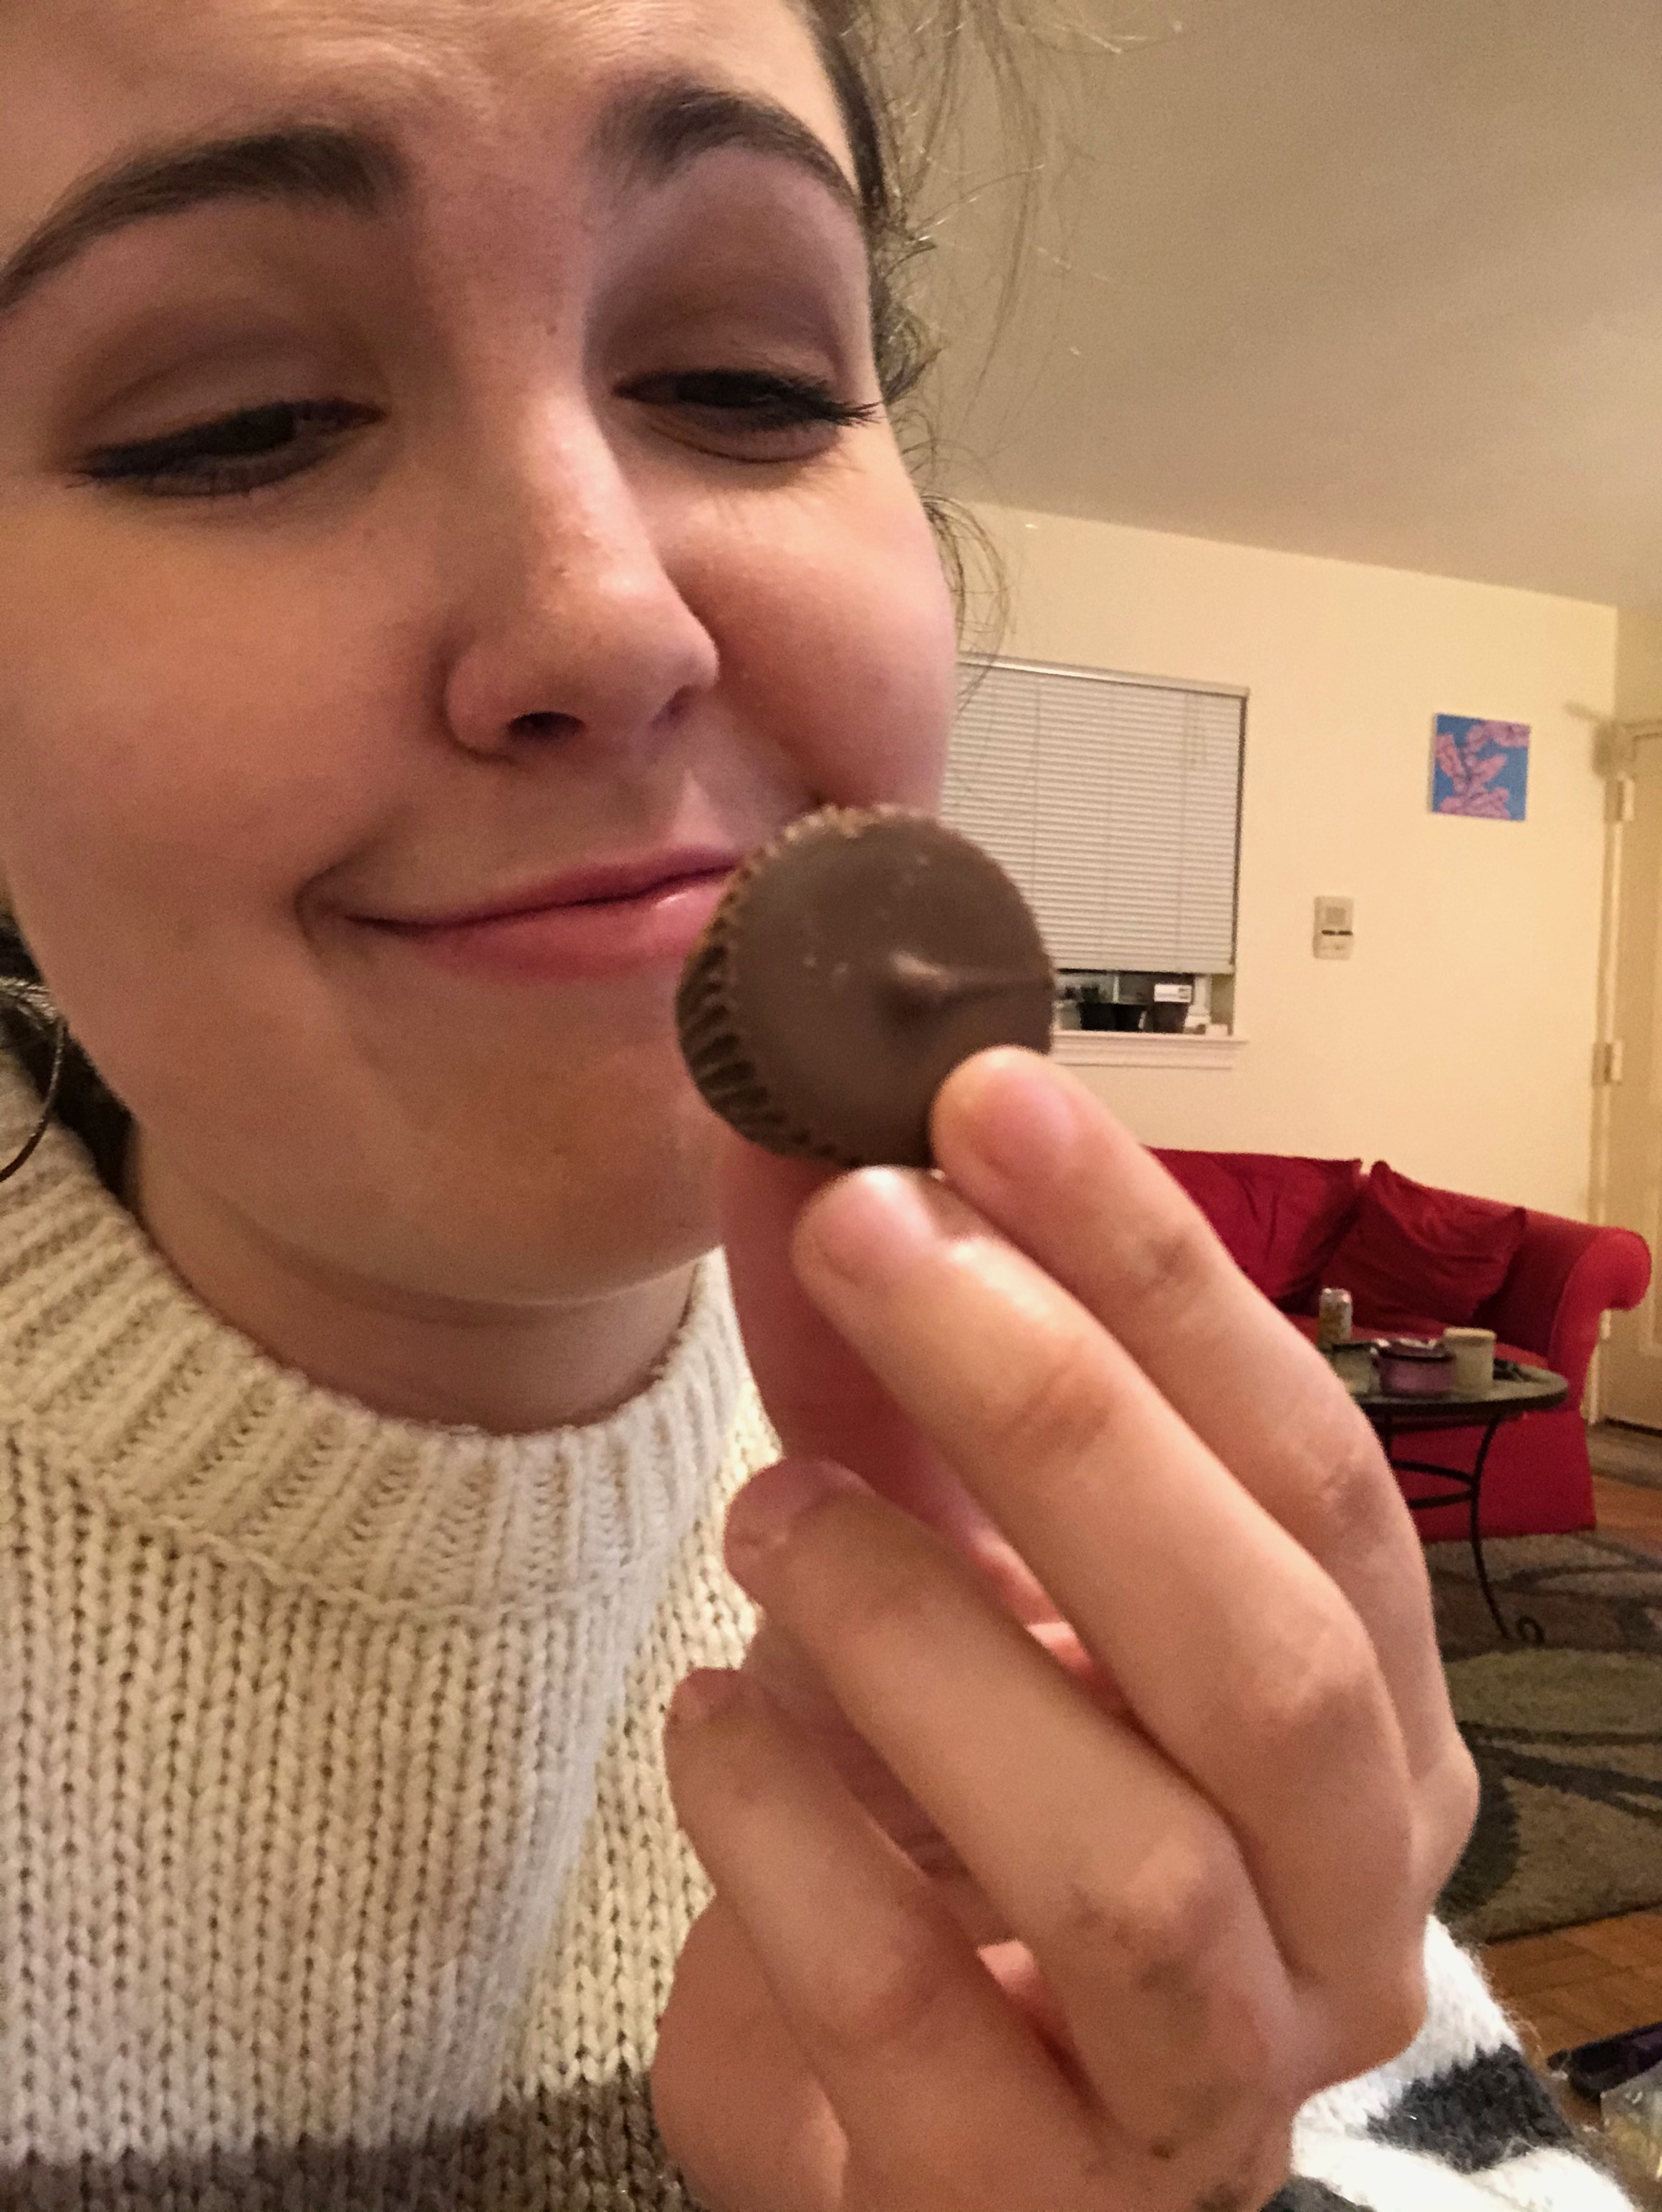 Andria staring longingly at peanut butter cups